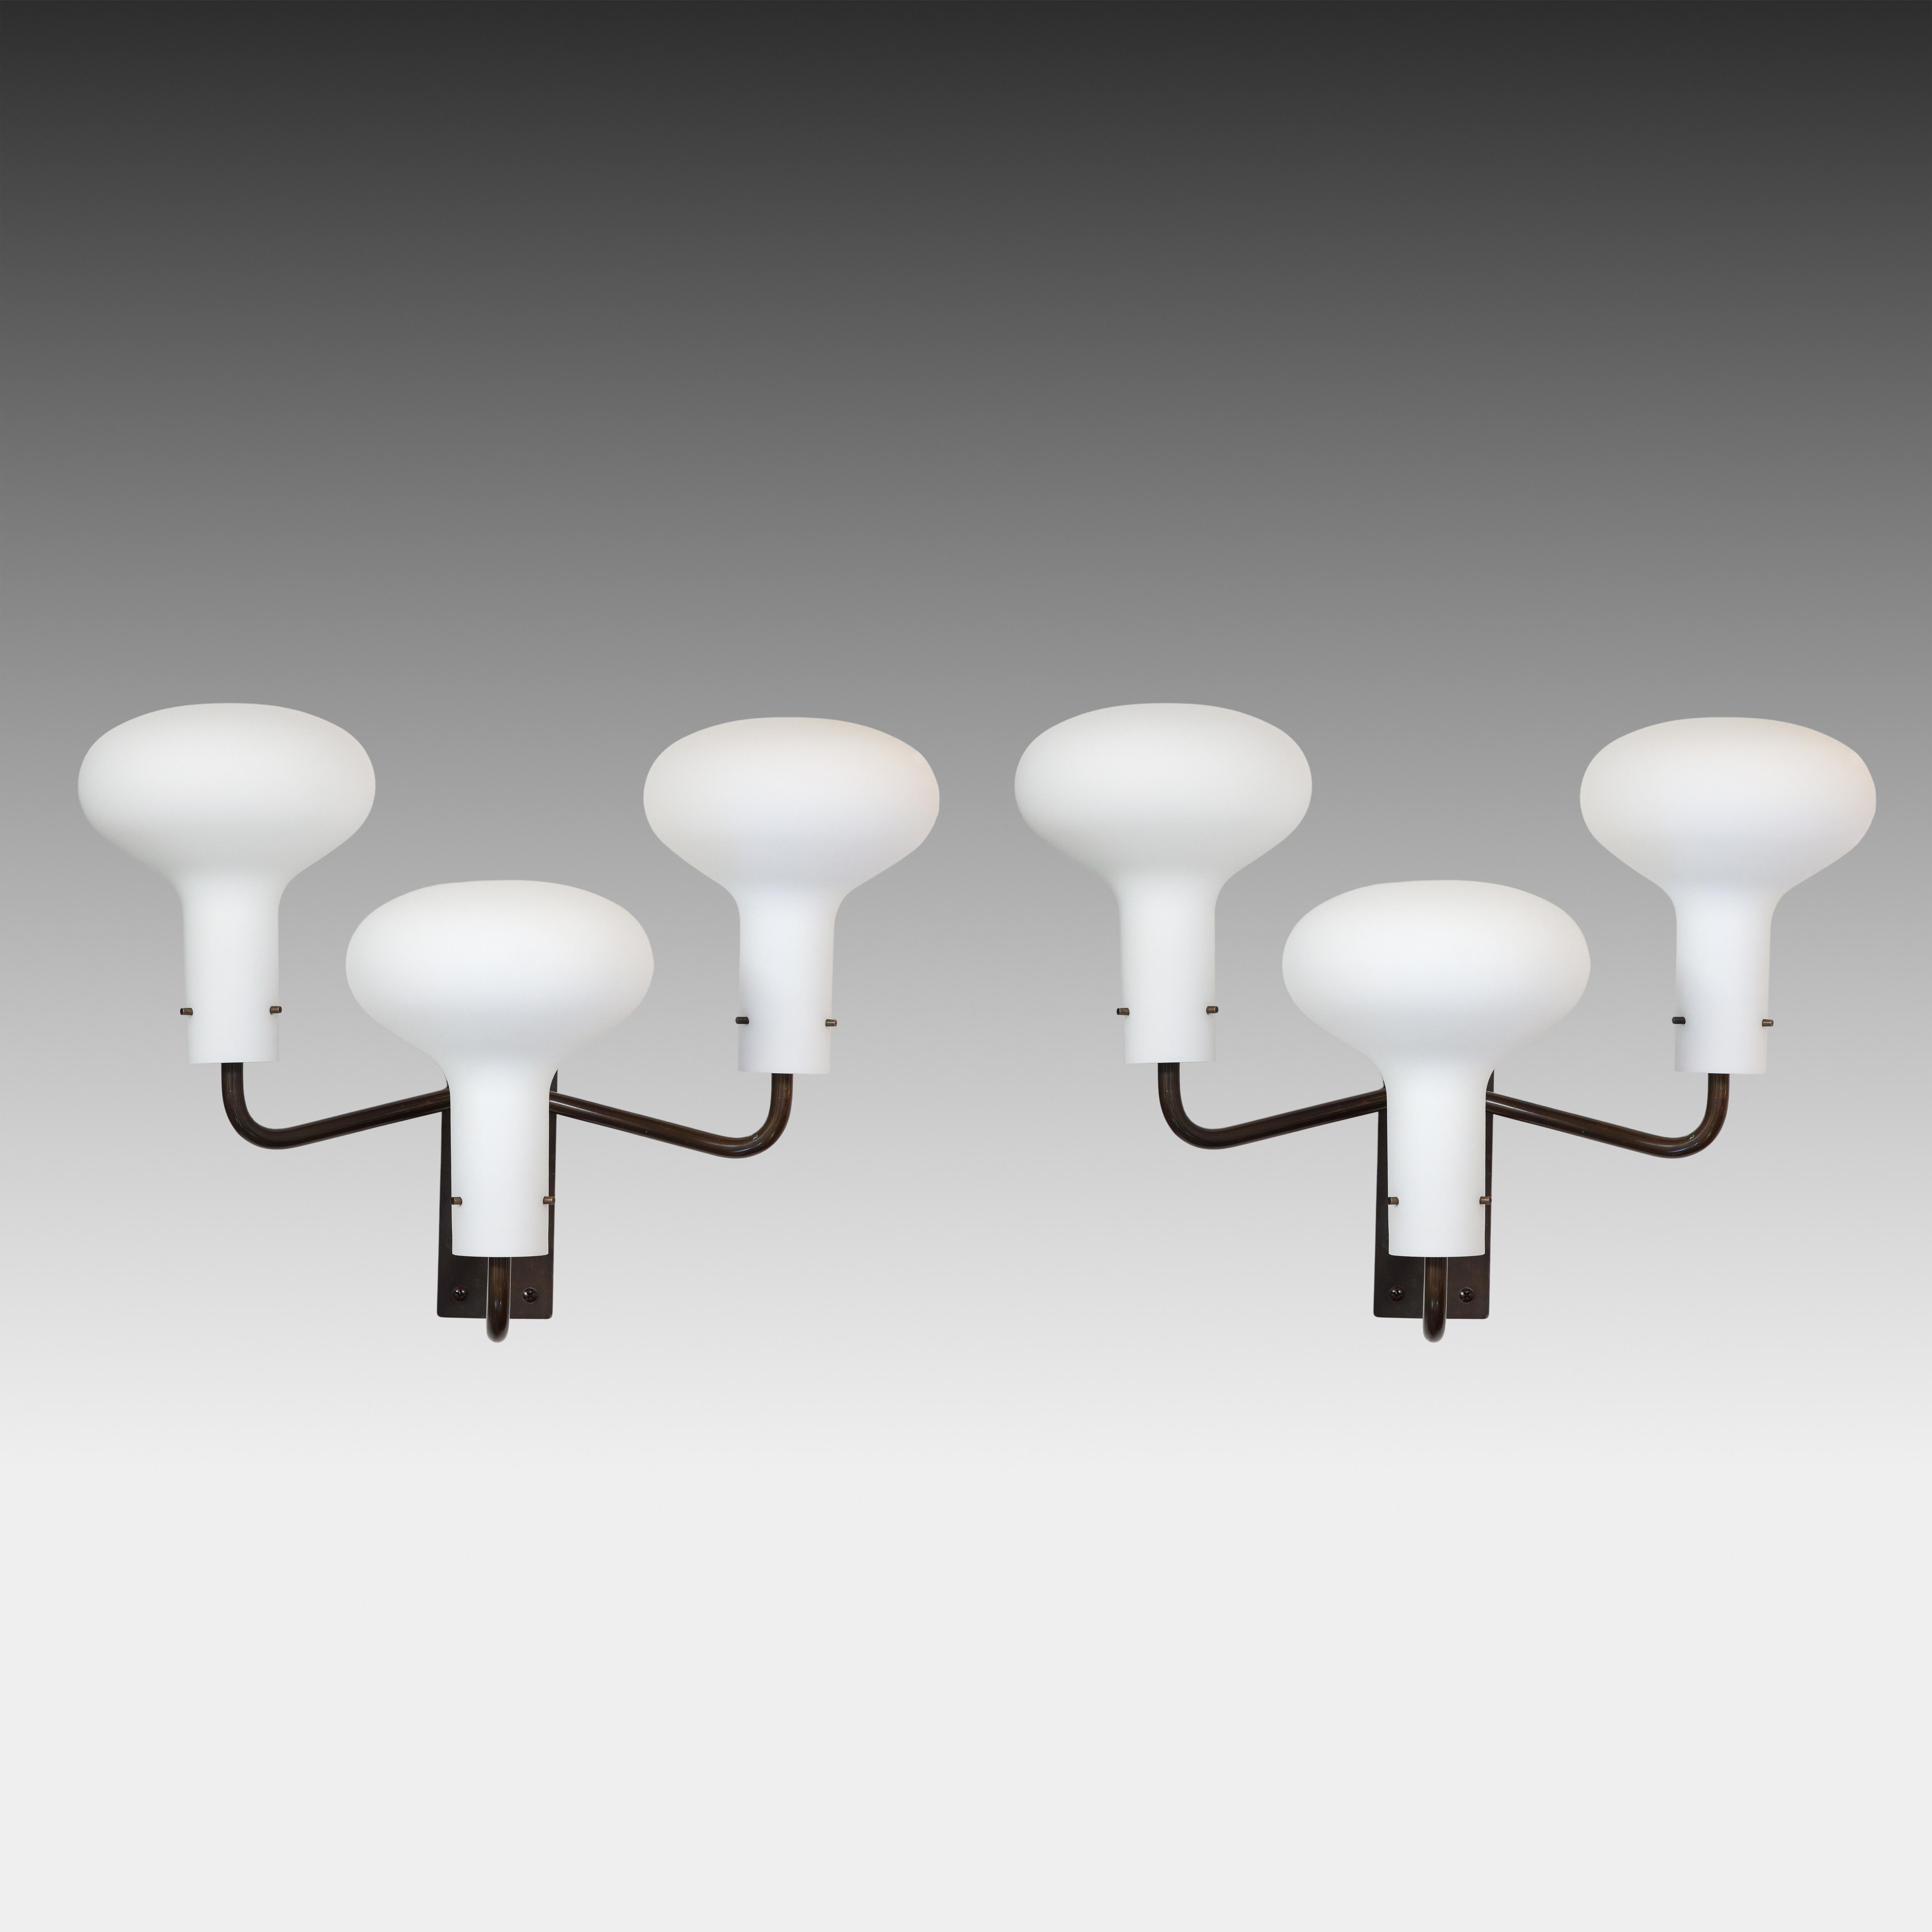 Ignazio Gardella for Azucena Pair of Three Arm Wall Lights Model LP12, 1950s In Good Condition For Sale In New York, NY